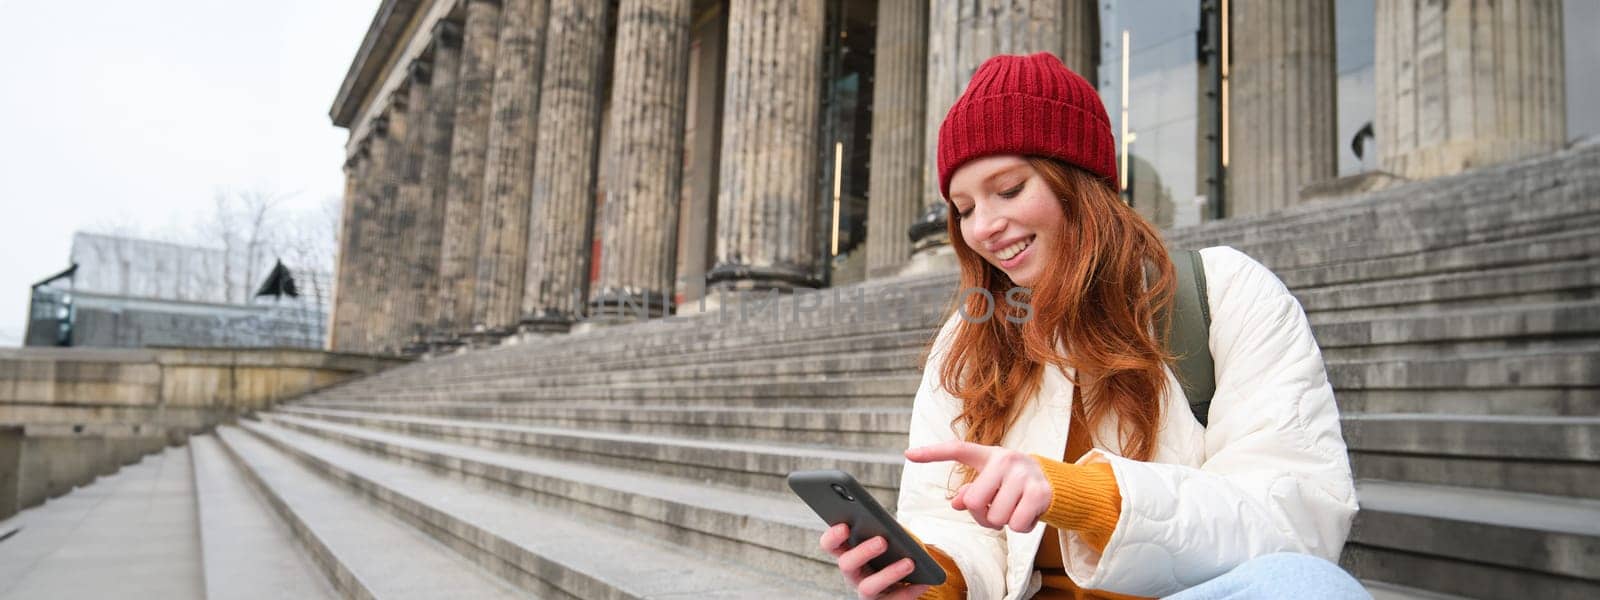 Stylish young redhead woman, talking on mobile phone app, using social media application, looking for something online on smartphone, sits on stairs outdoors.